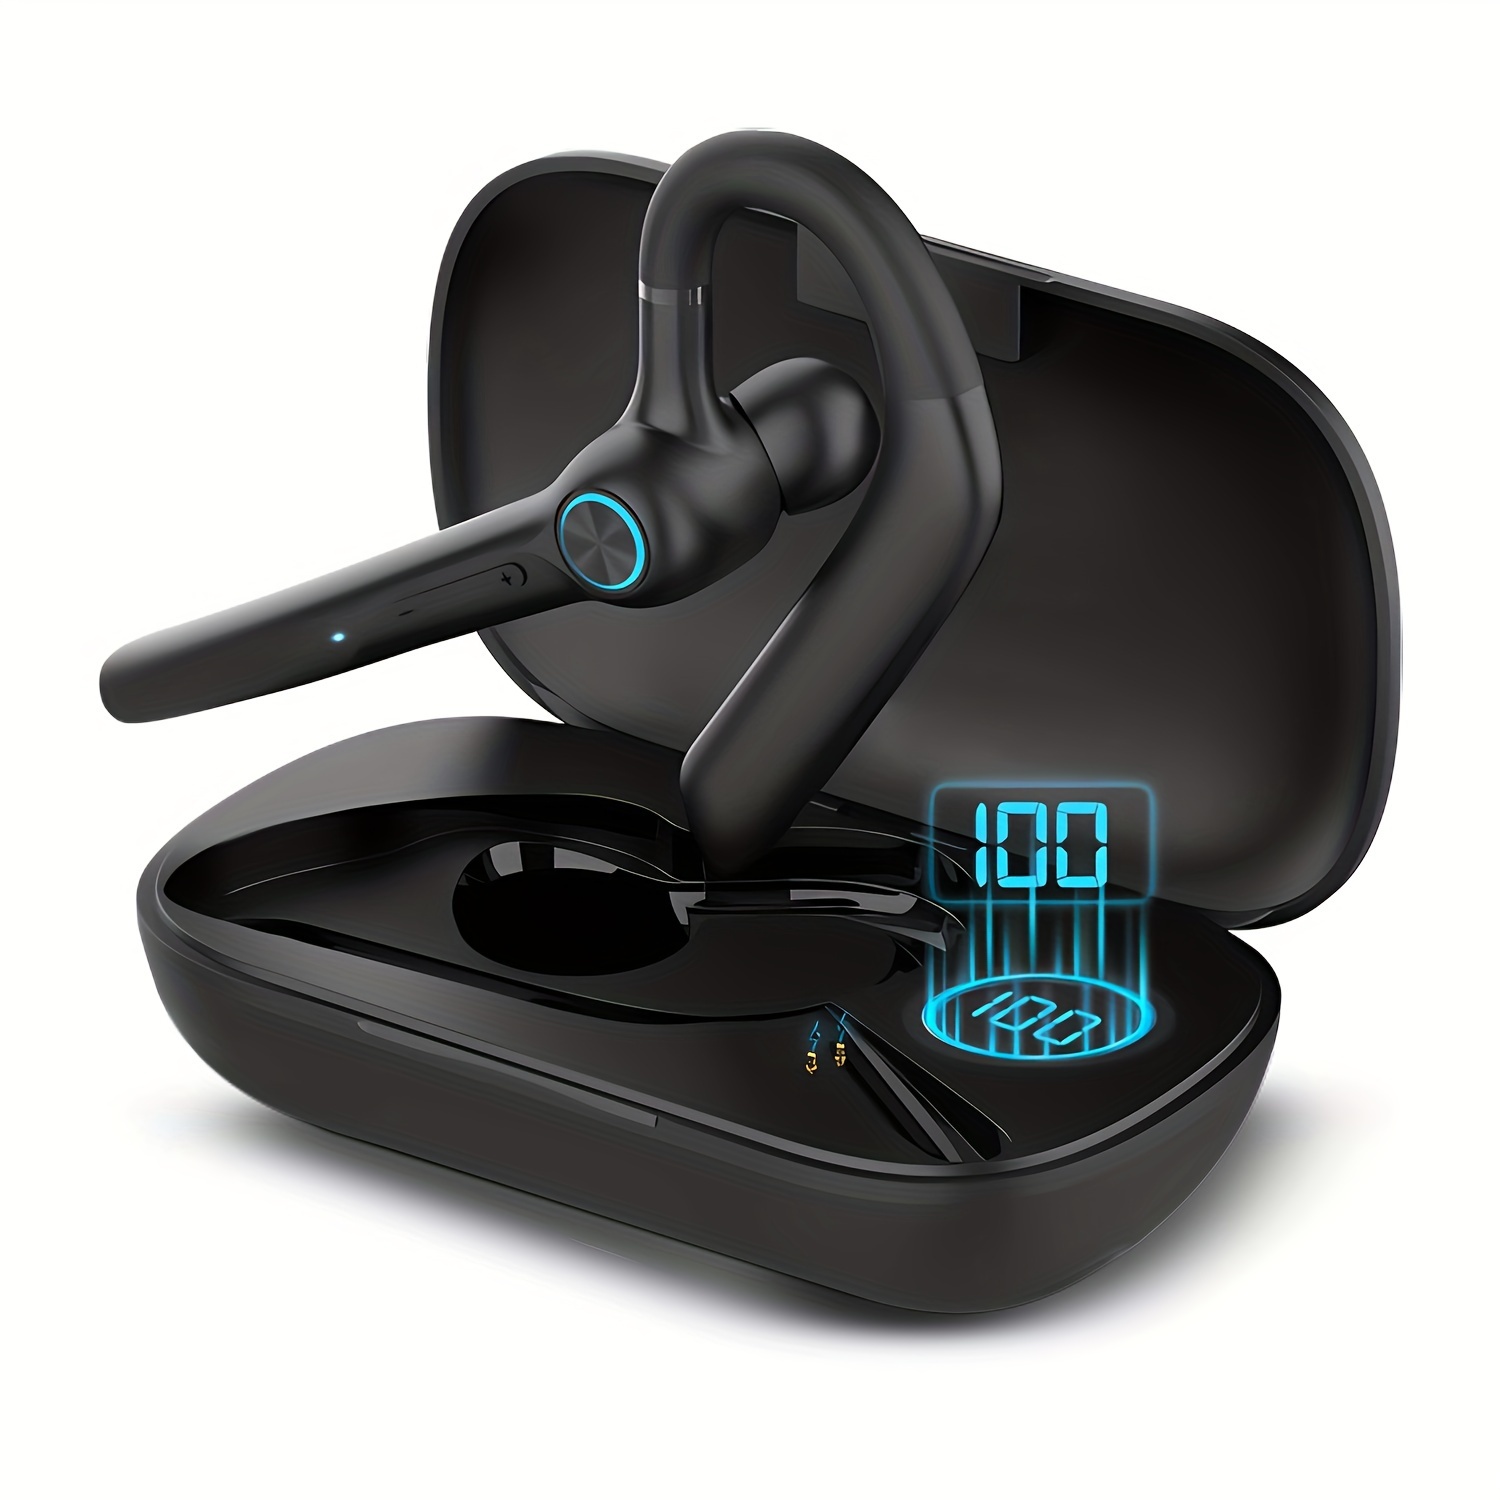 

Wireless Earphones With 60 Hour Playback And Built-in Dual Microphone Noise Reduction Wireless Earphones, Equipped With A 400mah Led Charging Case, Suitable For Business Office Truck Drivers